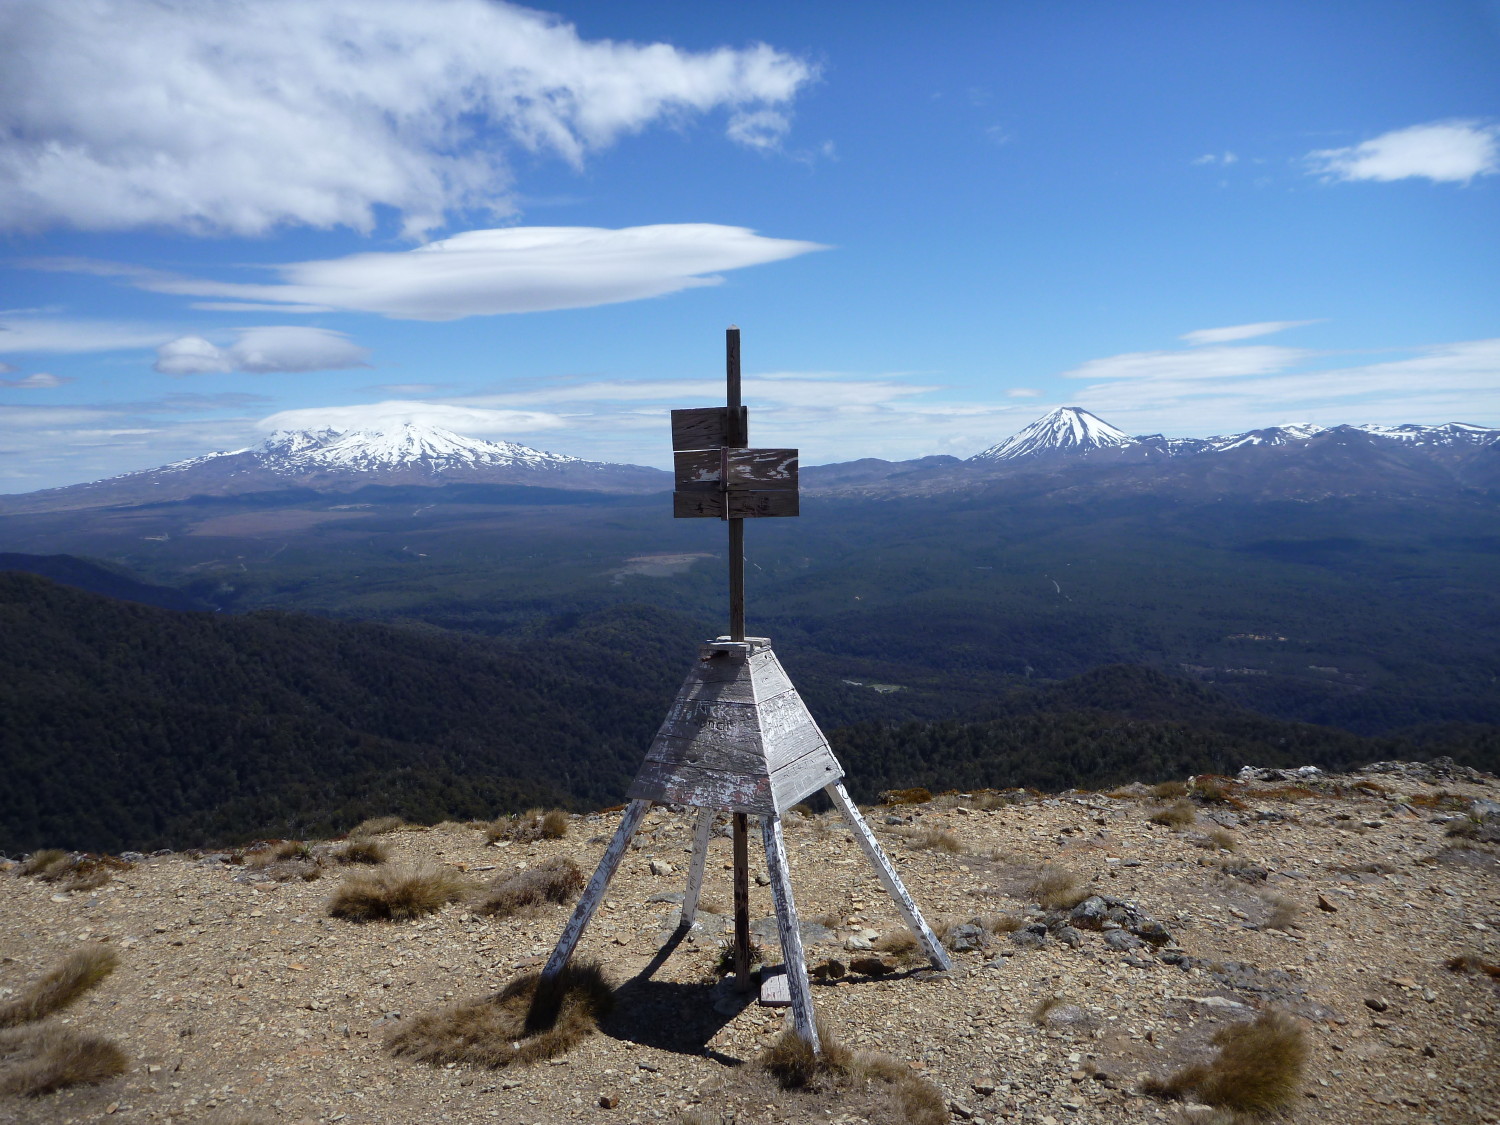 The Urchin trig and views